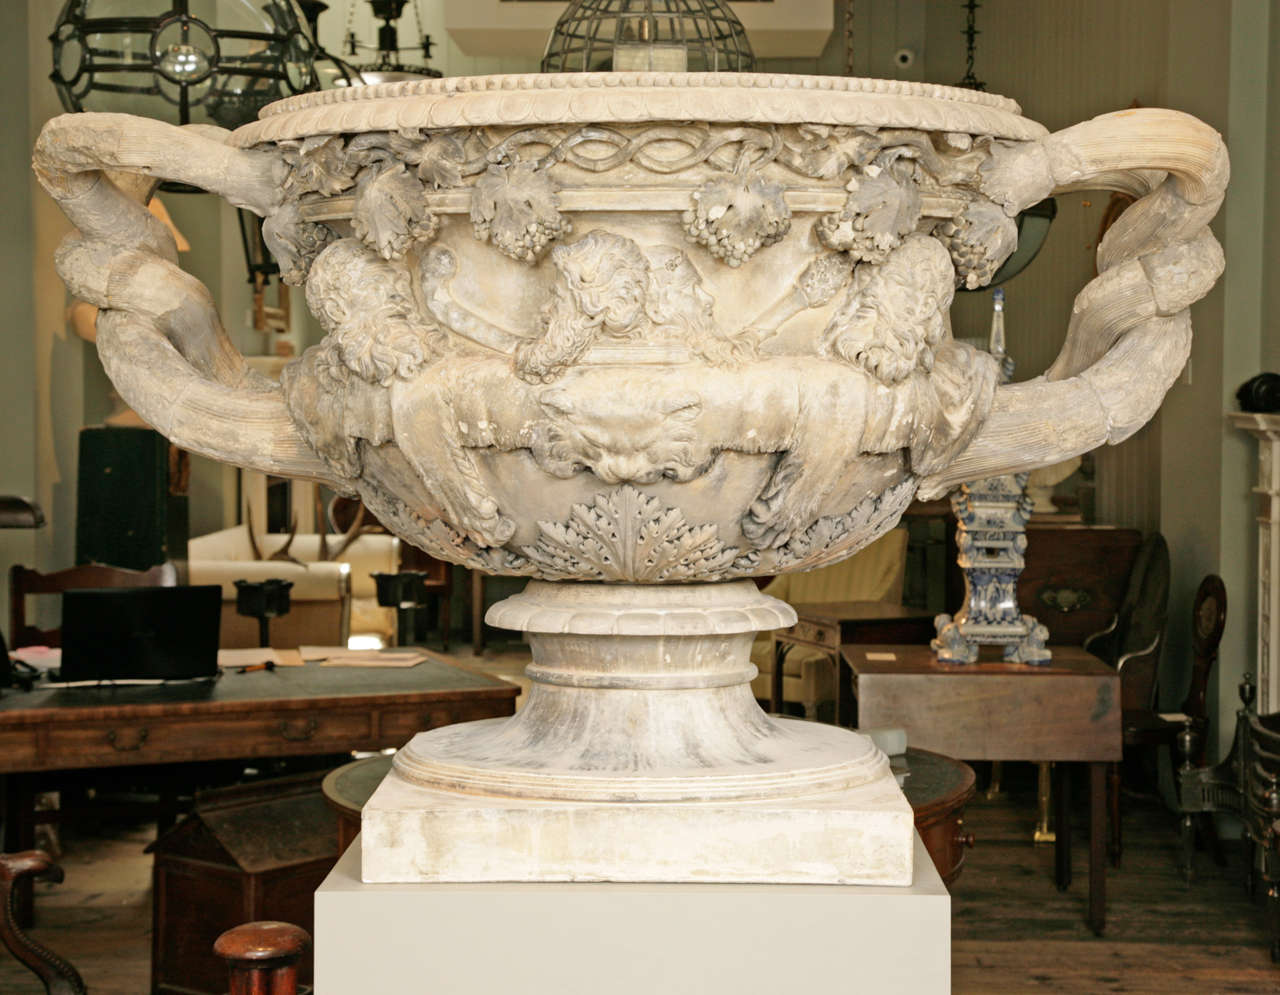 The Warwick vase was found in fragments by Gavin Hamilton in 1769-1770 digging in the silts of lake Pantanello in the grounds of the Villa Tiburtina, the villa of the Roman Emperor Hadrian outside Rome. It was restored in 1772-1774 by Grandjacquet